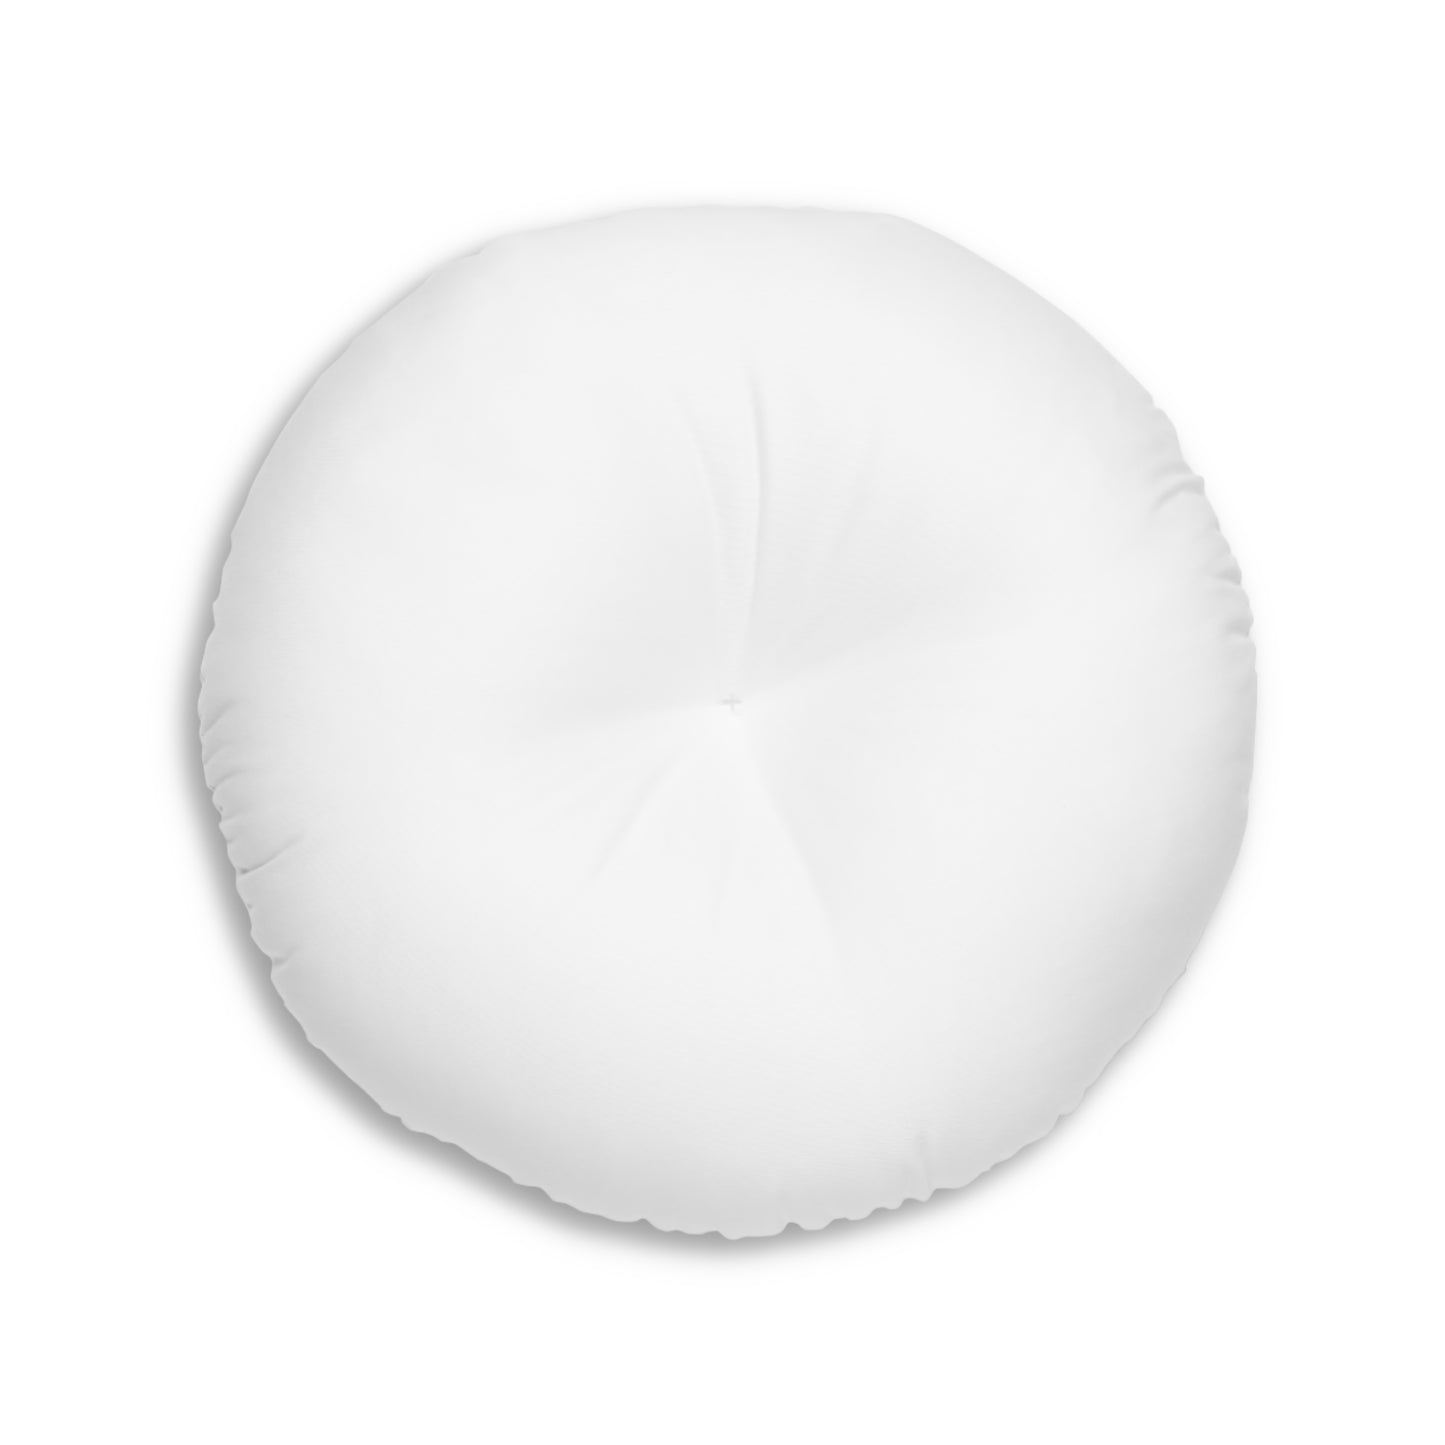 Tiger Tufted Floor Pillow, Round